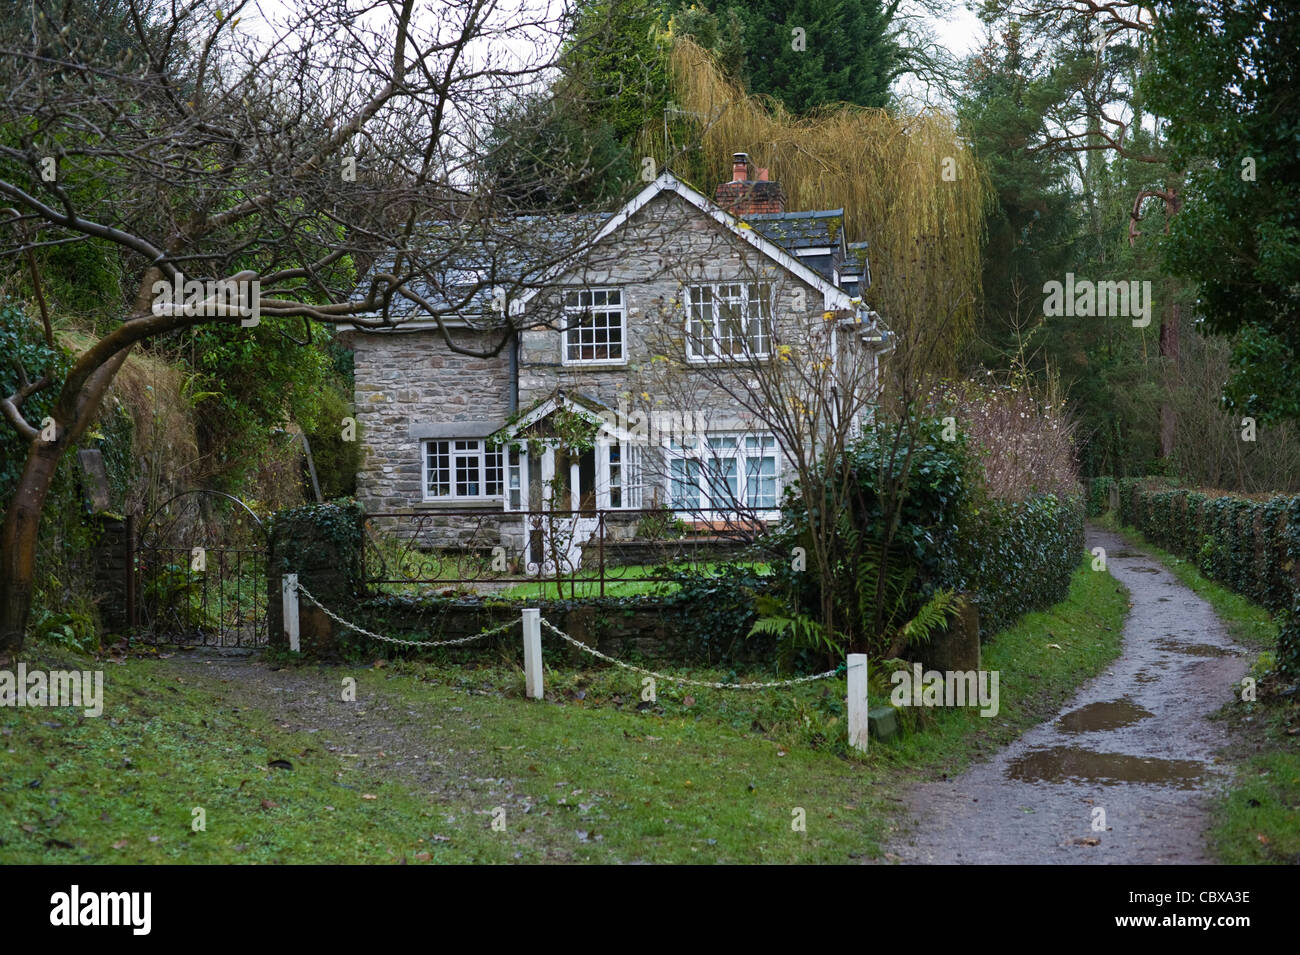 Idylic Cottage With Footpath On The Banks Of The River Wye Near